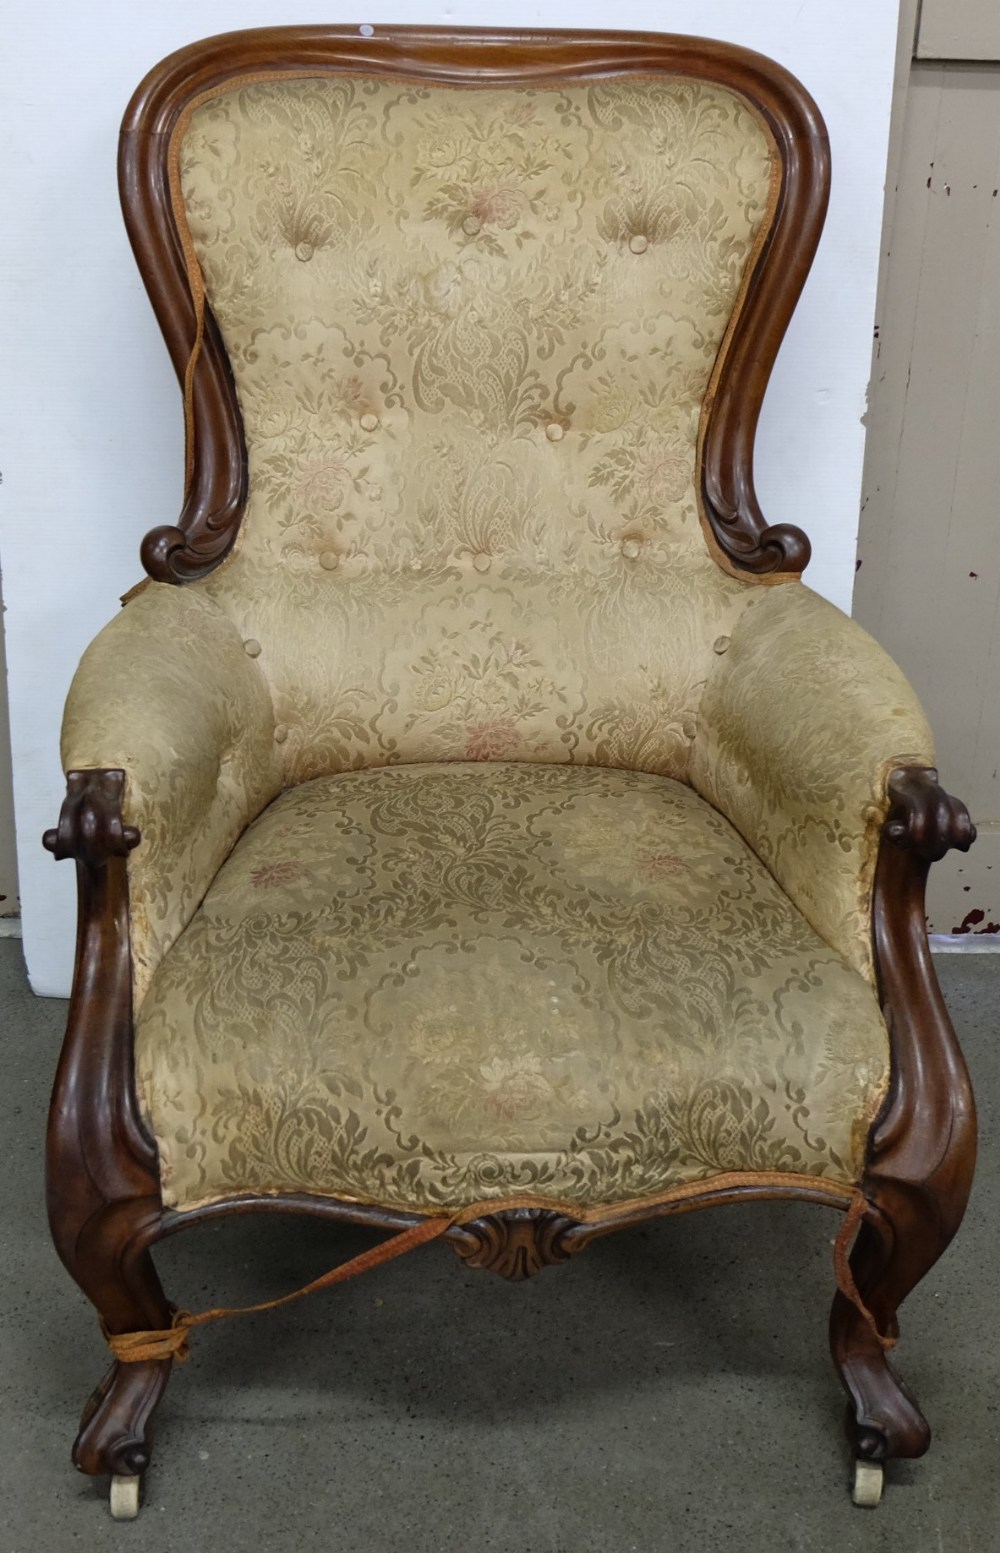 Late 19th Century Mahogany framed library armchair, curved back with scrolled arms and similar